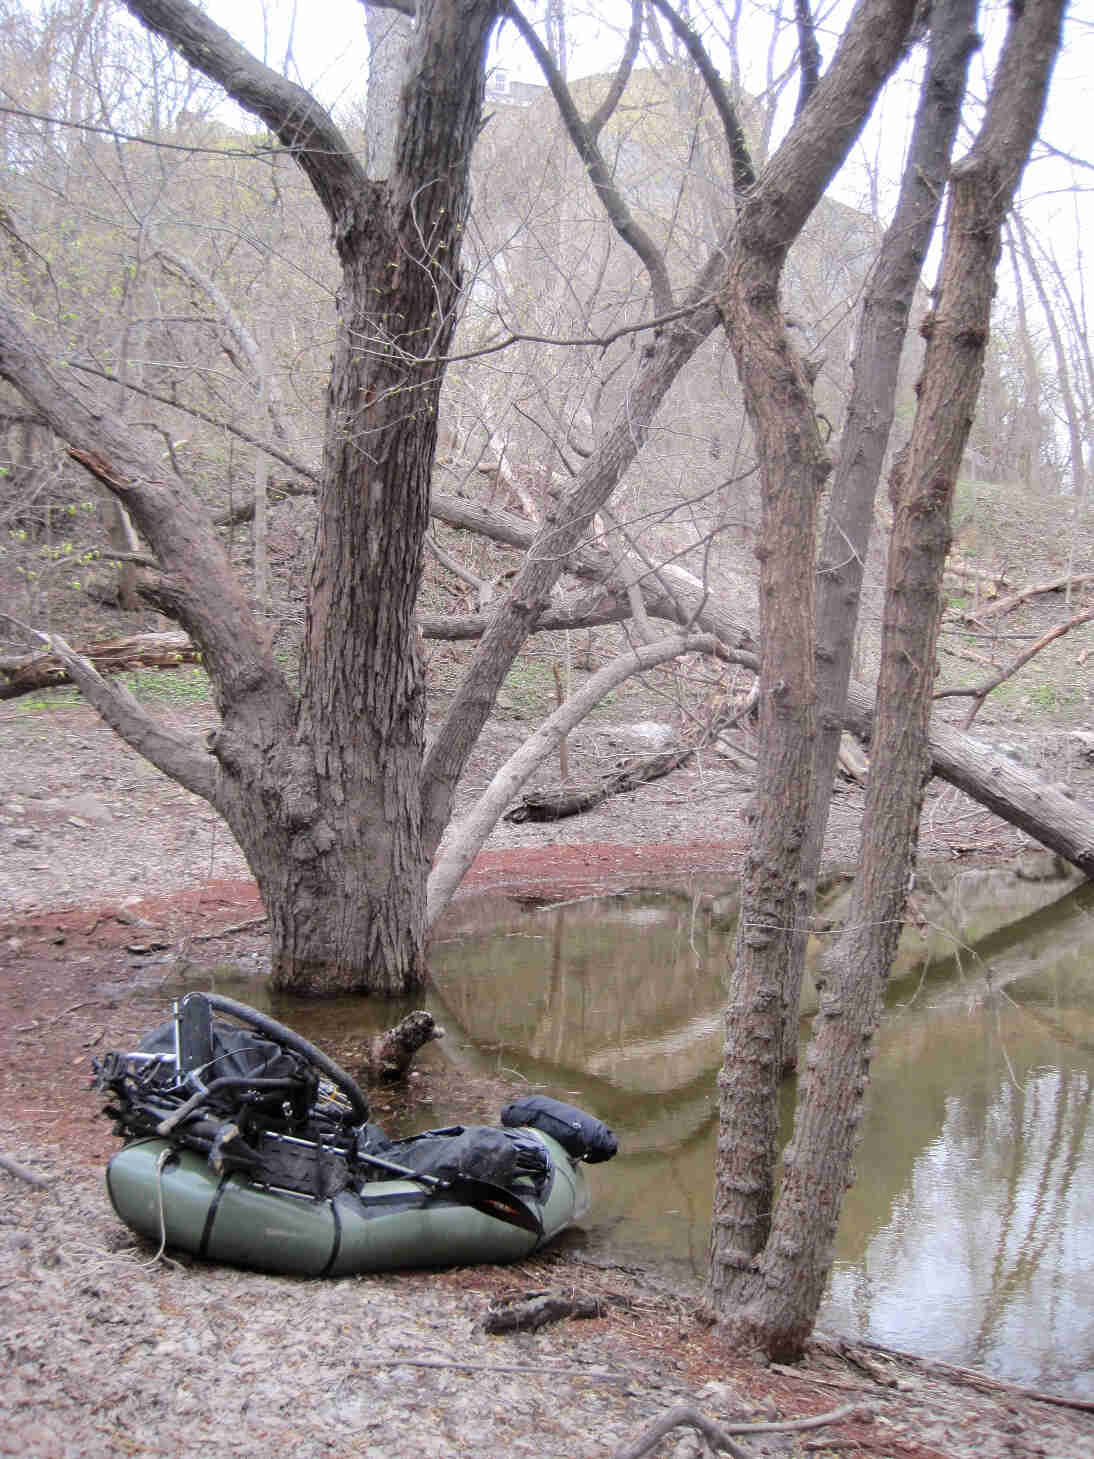 An olive green inflatable raft with a disassembled bike on top, on a dirt river bank in the bare woods